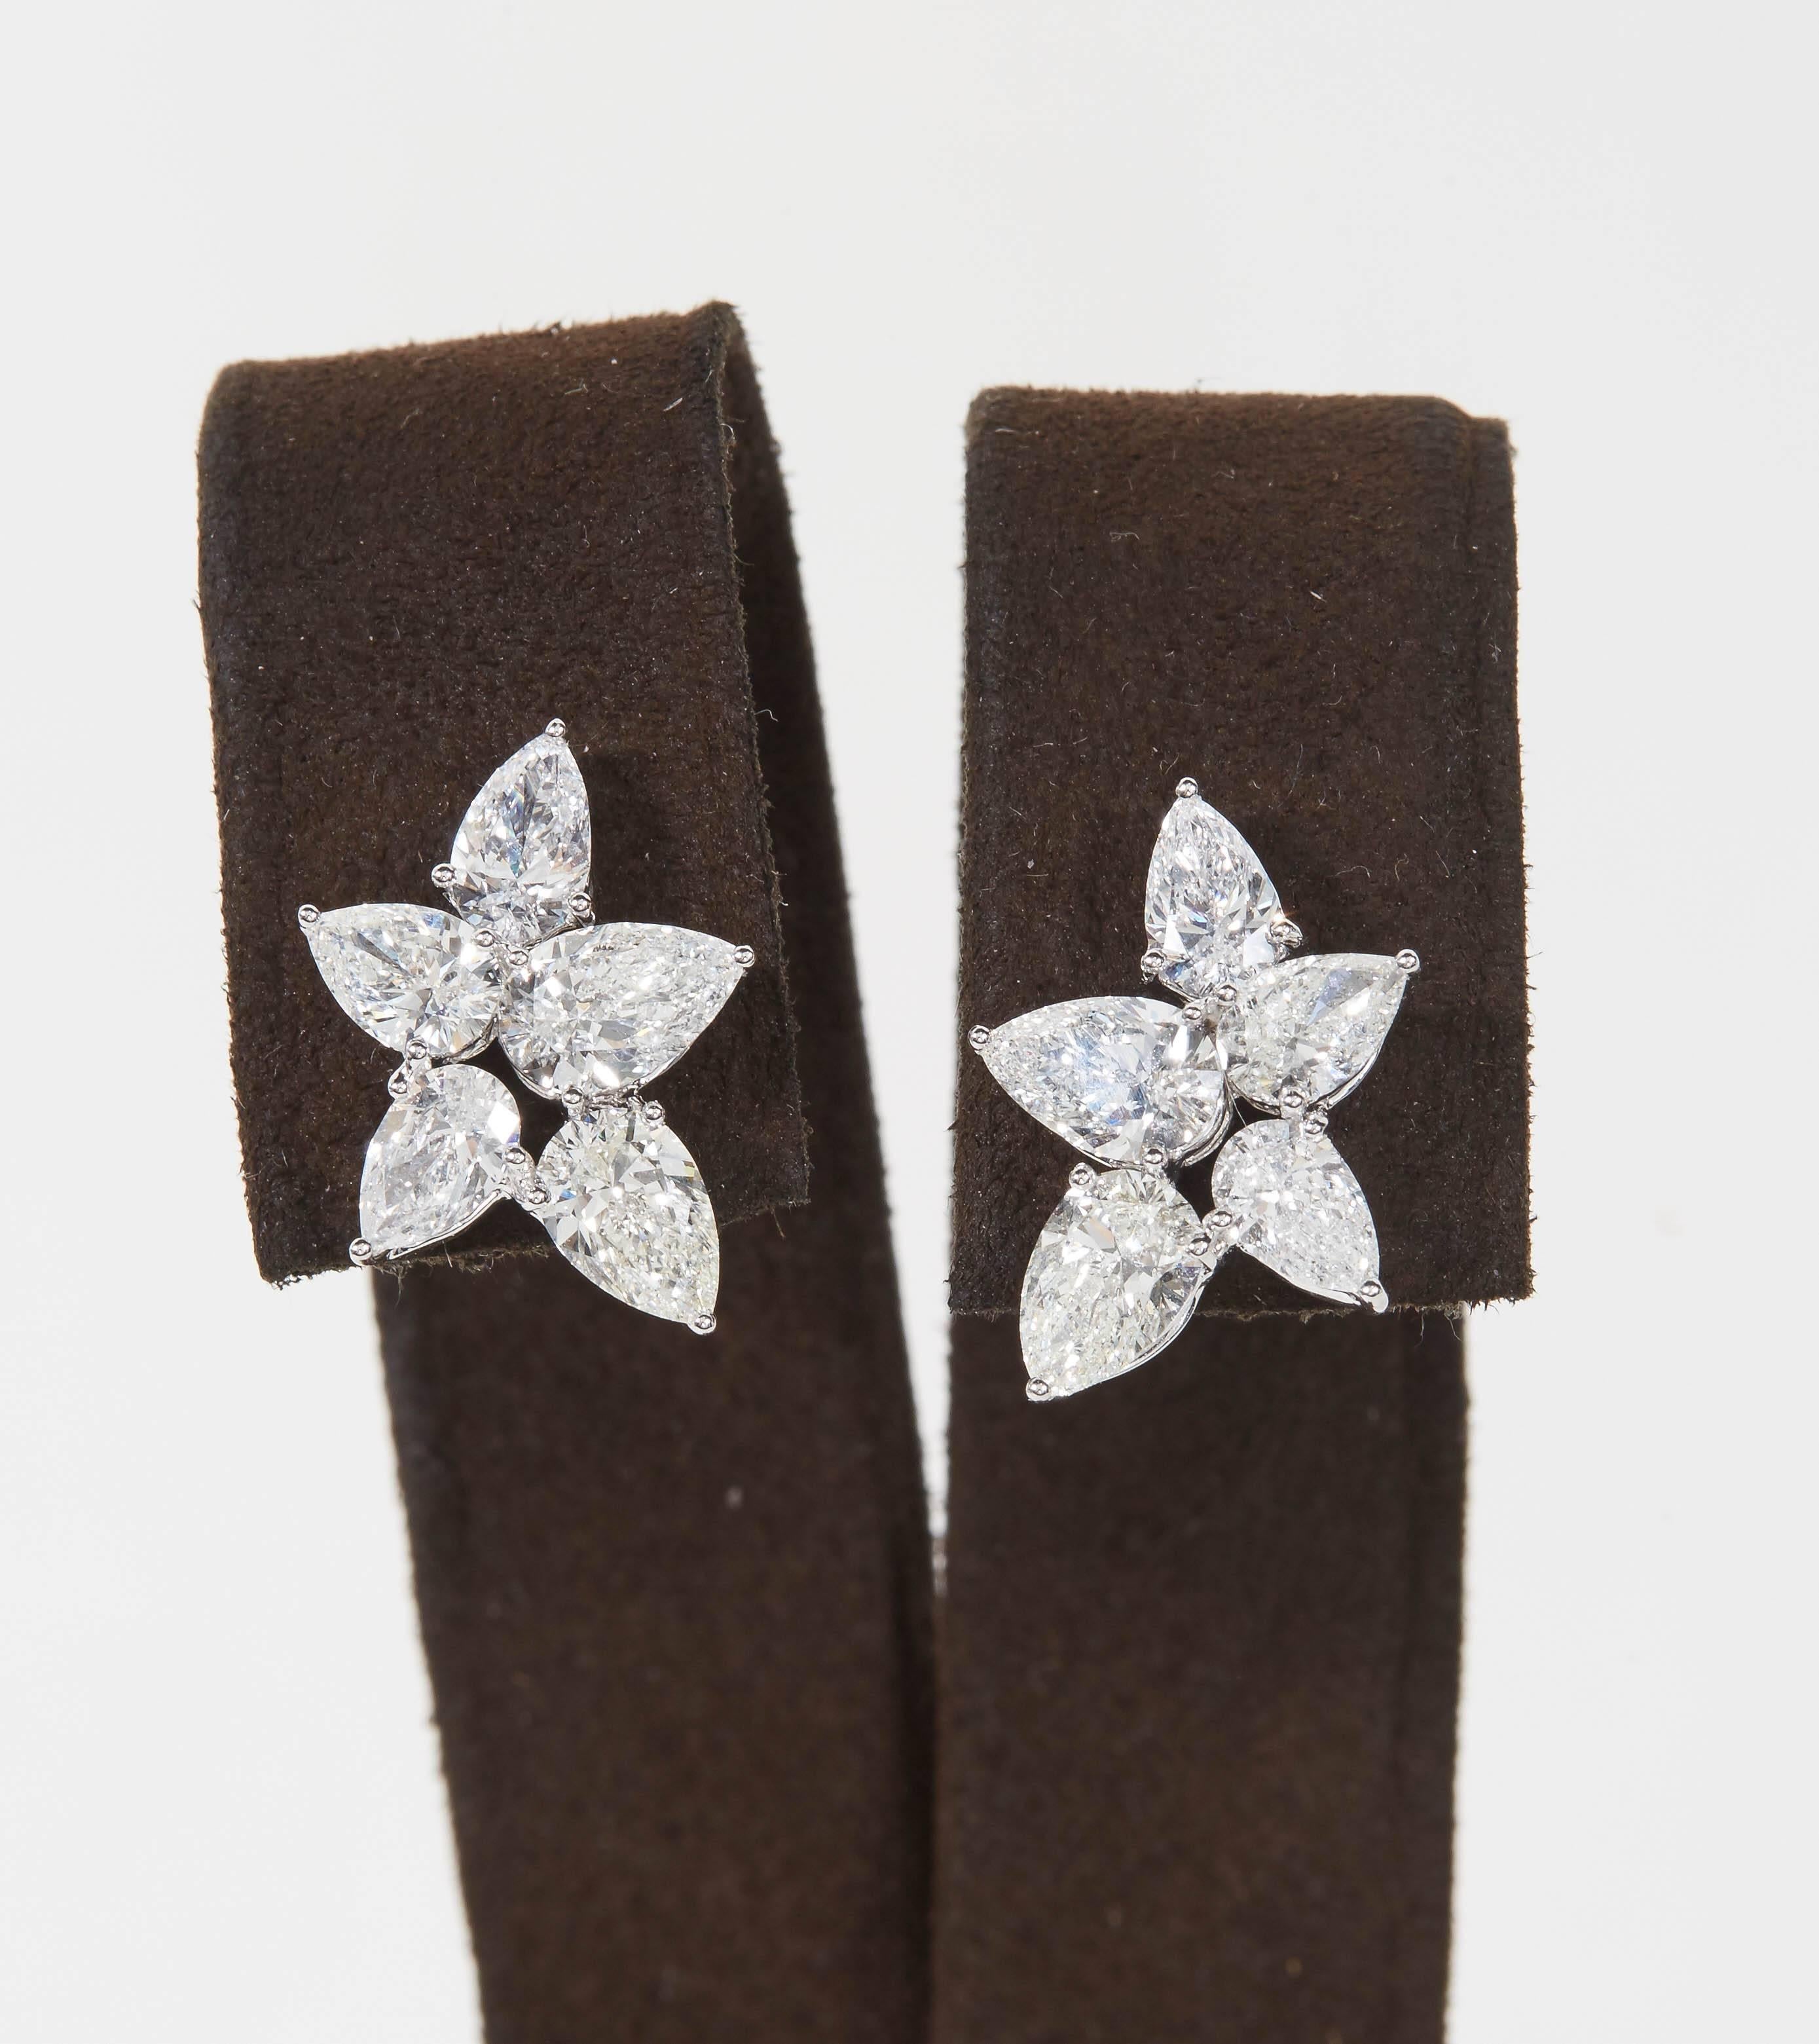 
An elegant and rich pair of diamond cluster earrings featuring larger sized diamonds. 

4.30 carats of white pear shaped diamonds. 

18k white gold 

Approximately .70 inches from the highest to lowest point. 

